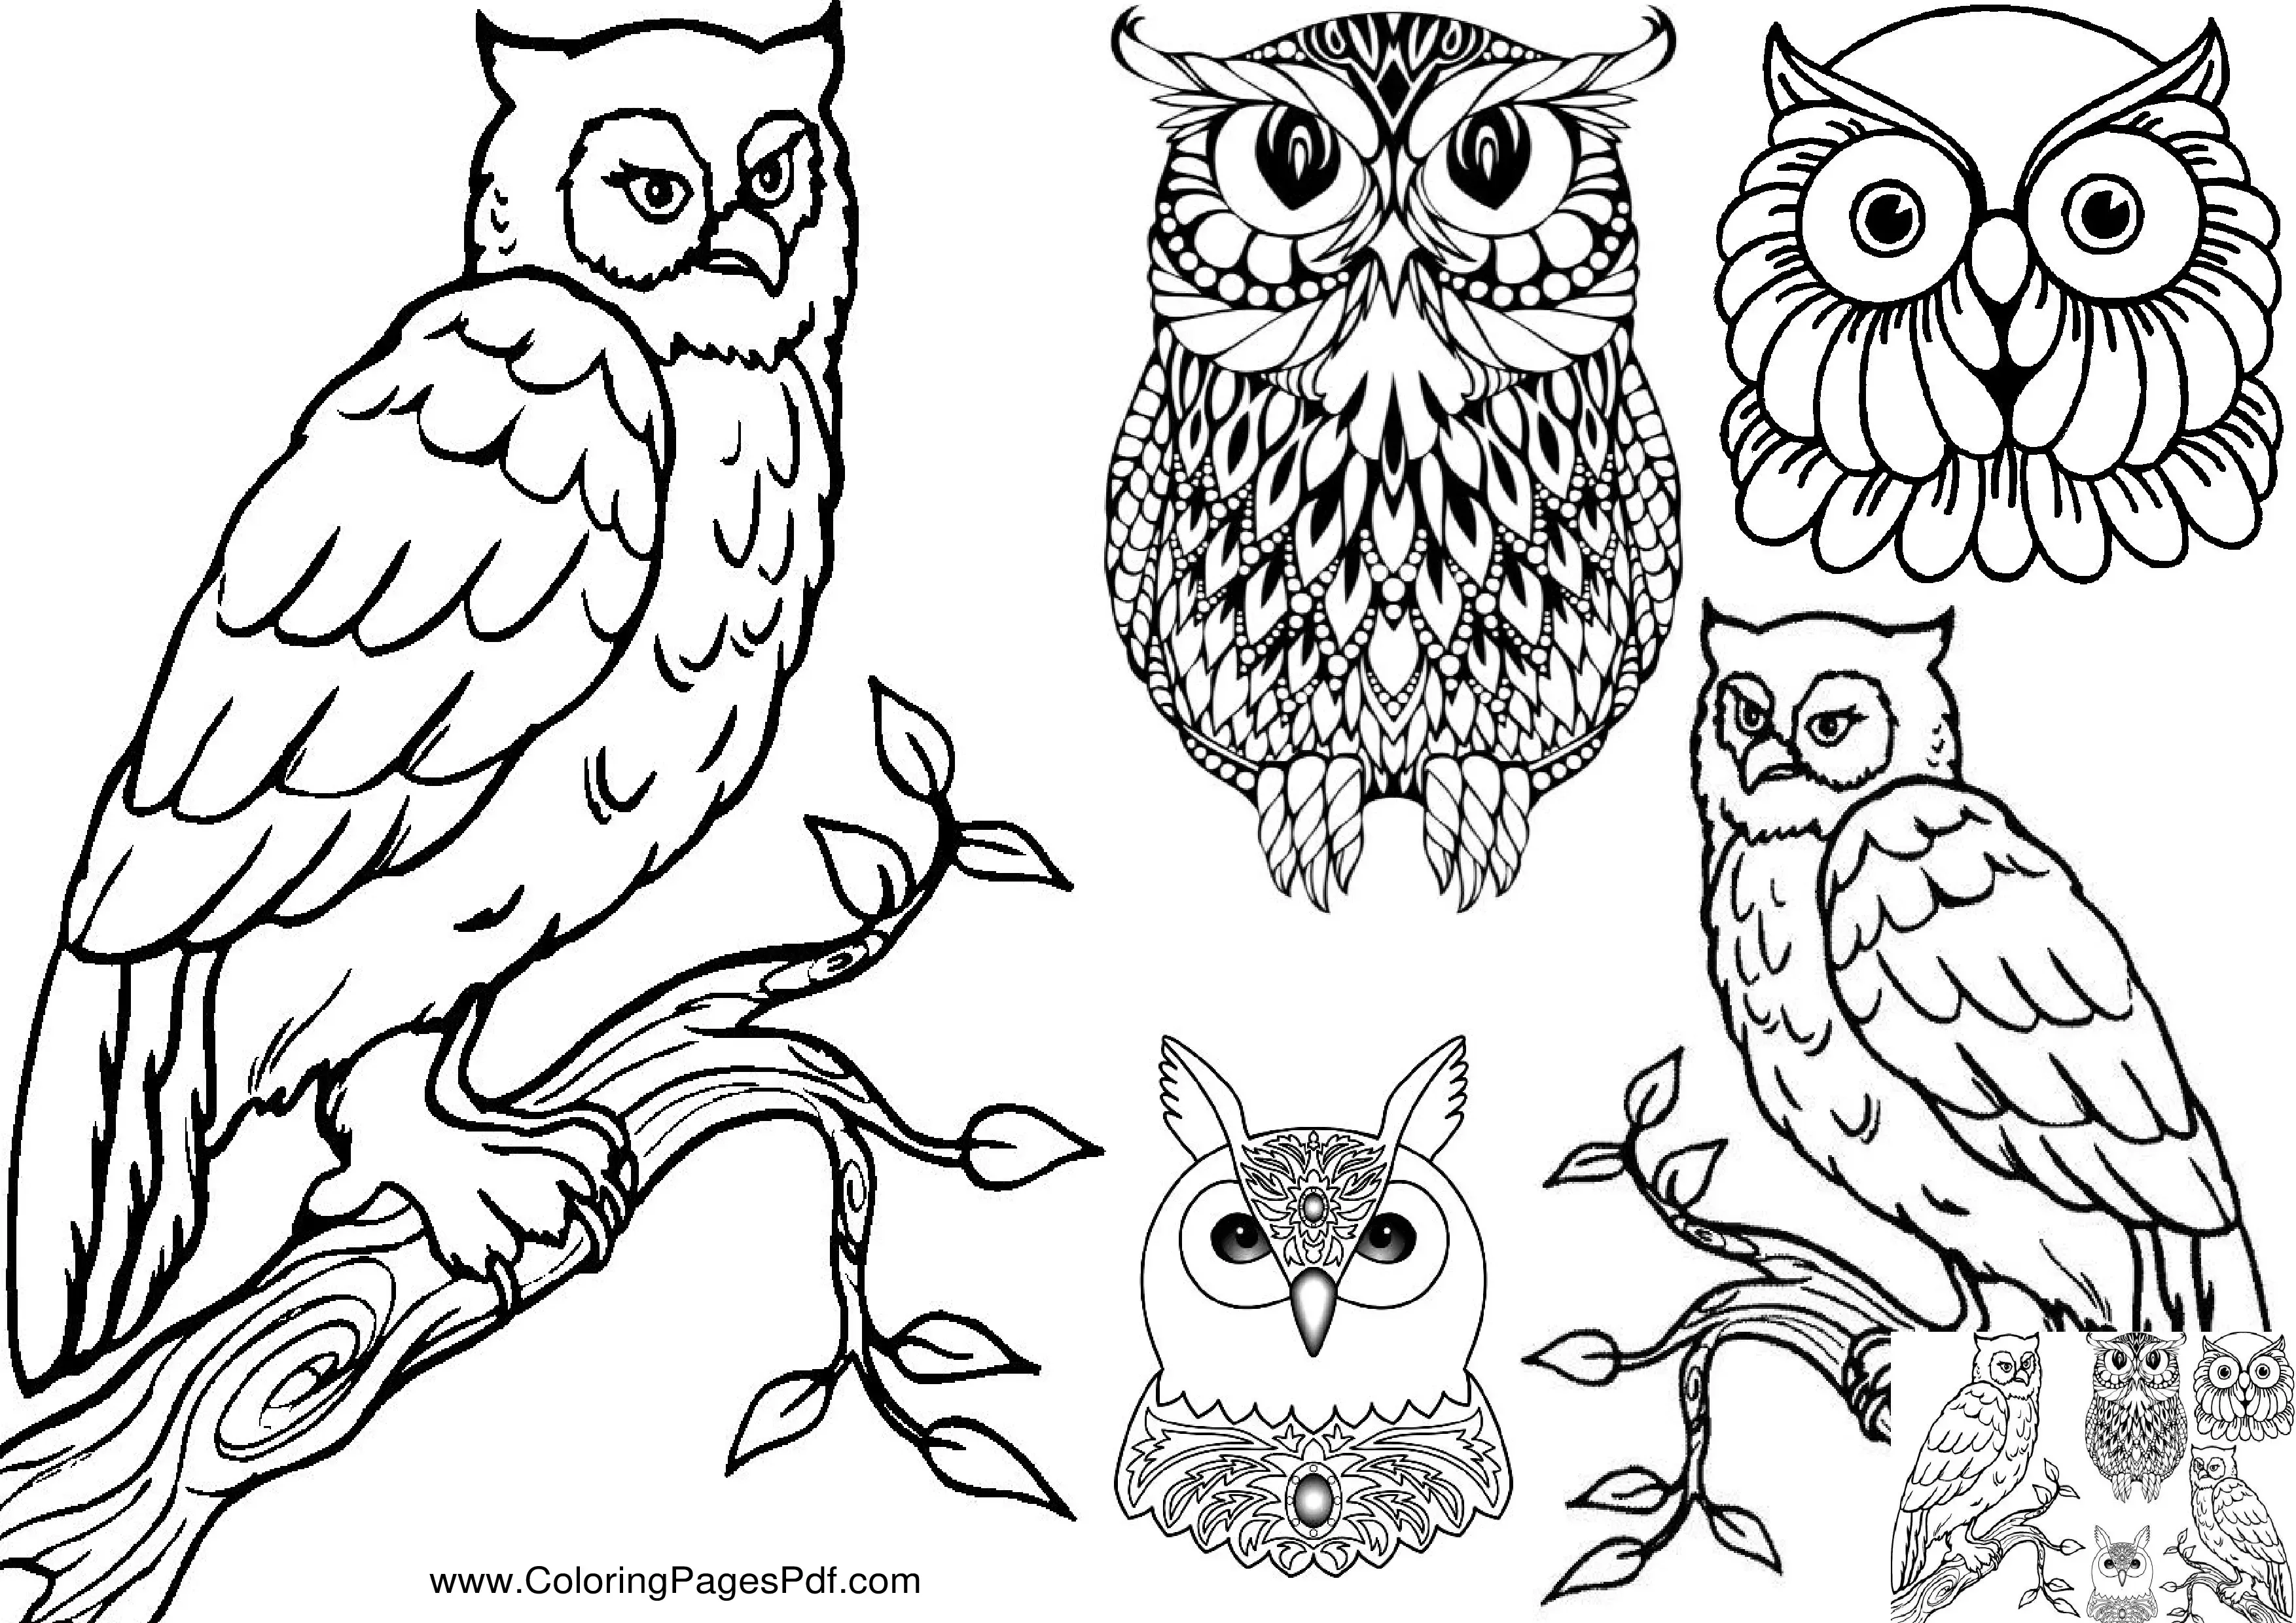 Realistic owl coloring pages